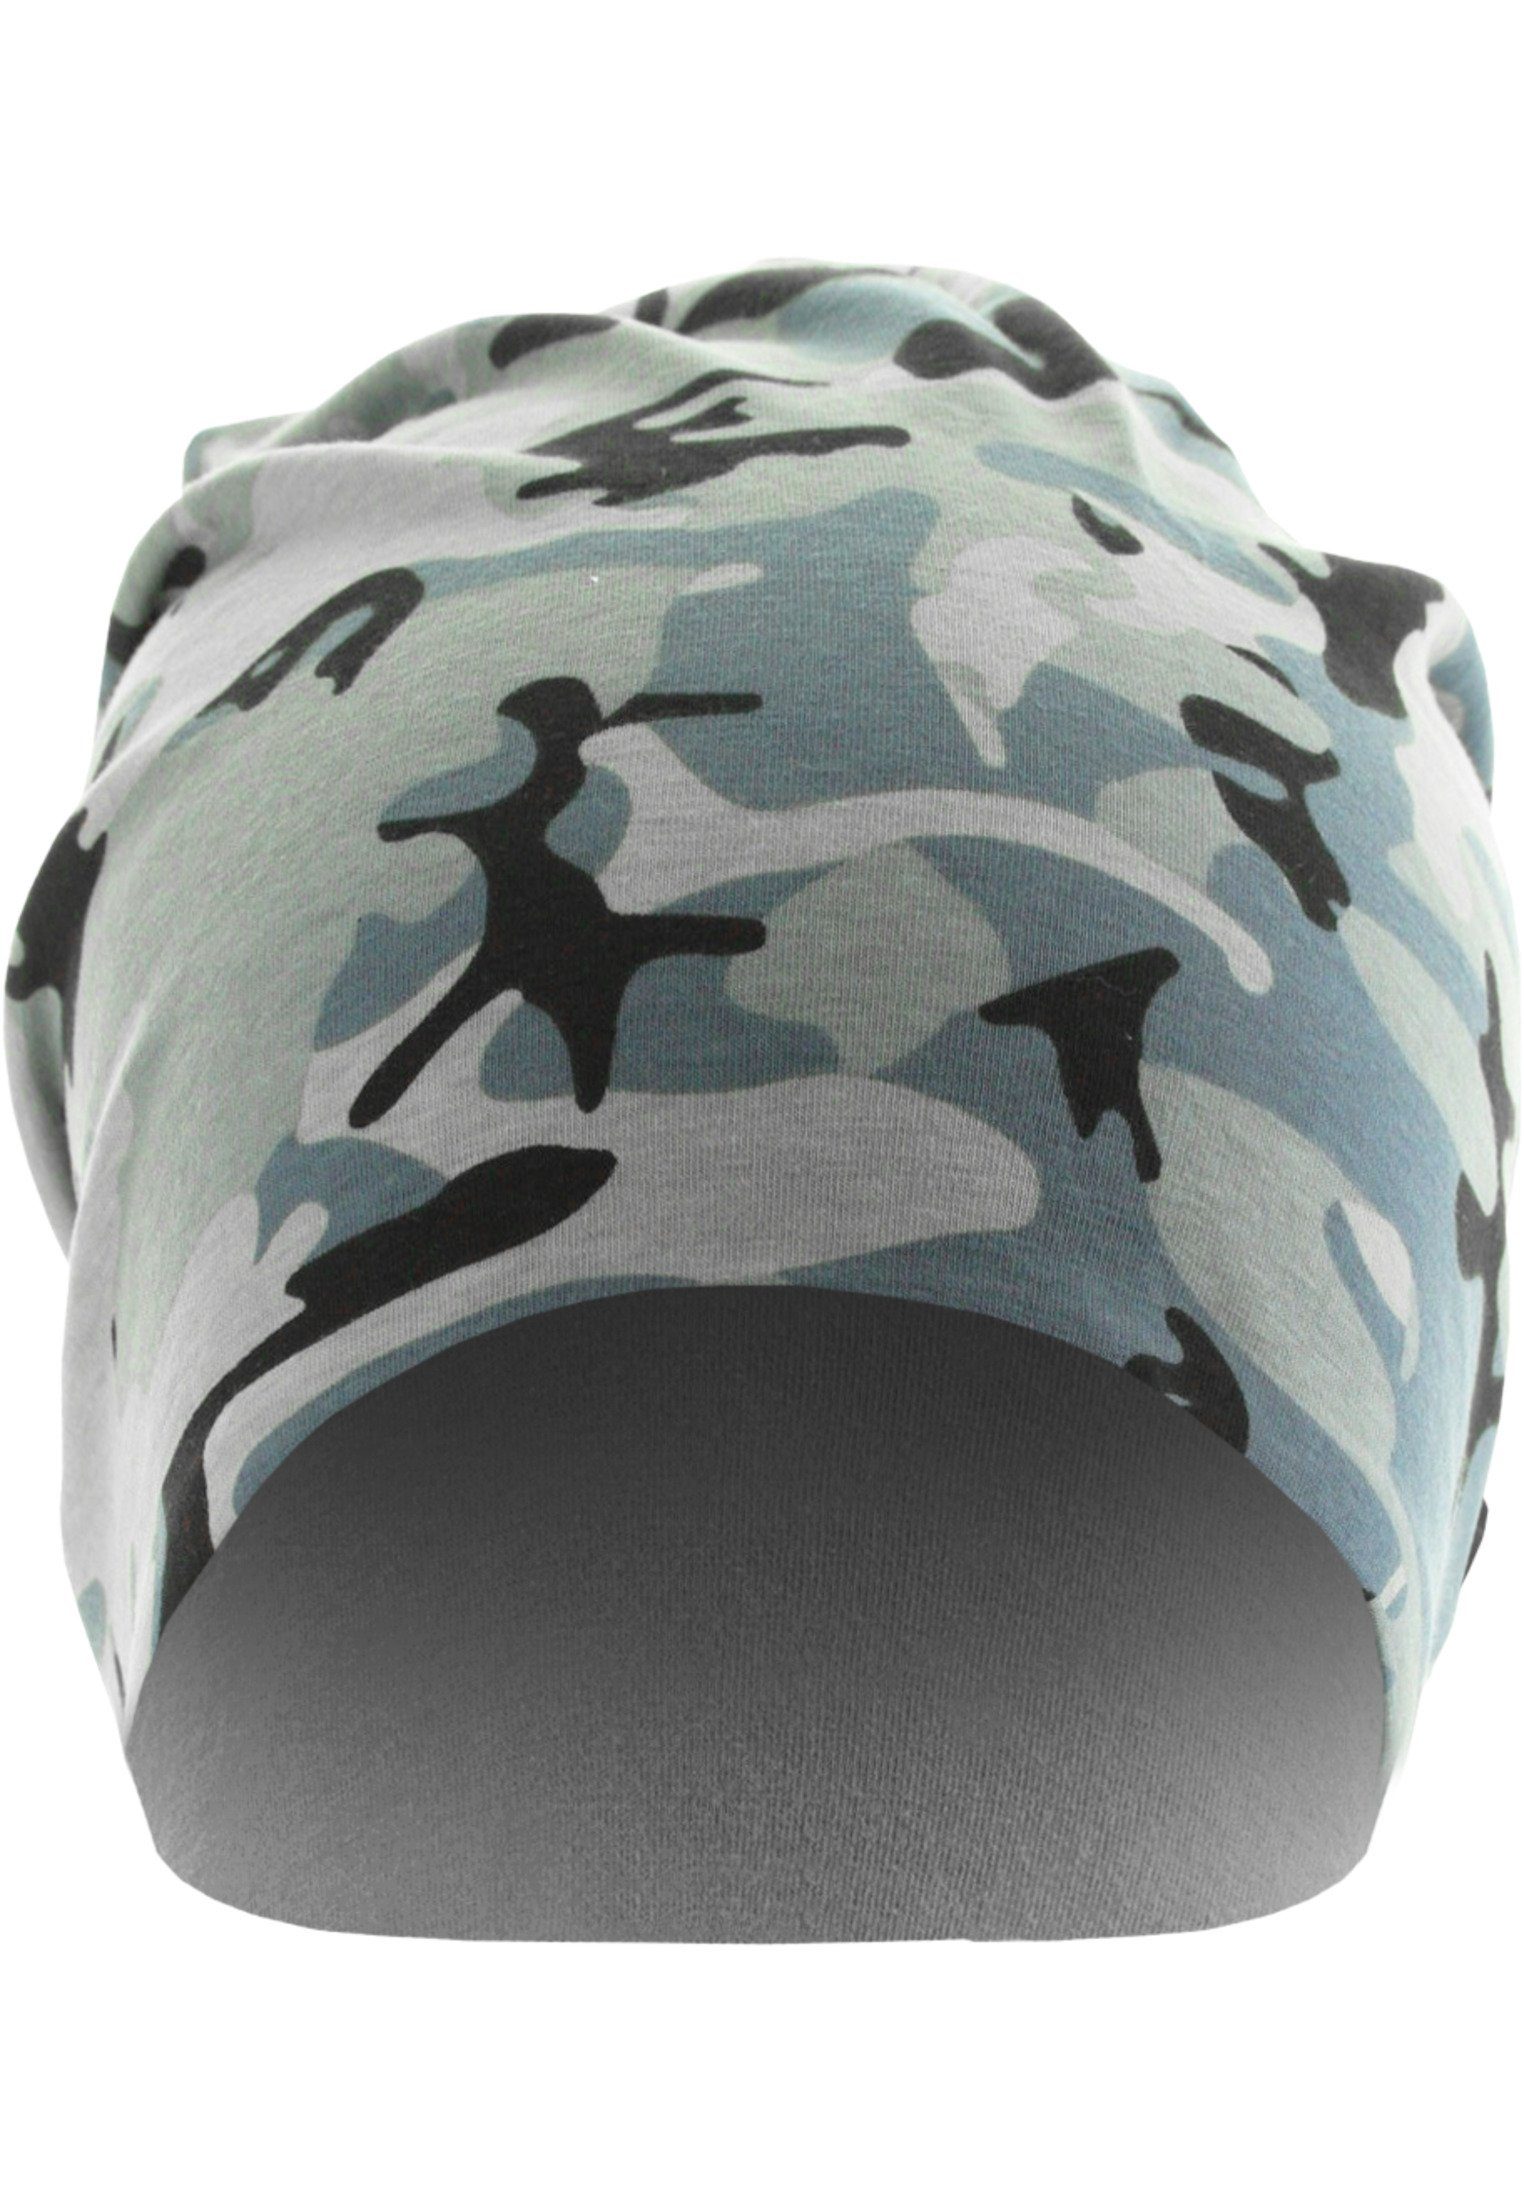 MSTRDS Beanie Accessoires Printed Jersey Beanie (1-St), Accessoires, Sale!,  Mstrds, Caps & Beanies, Caps & Beanies